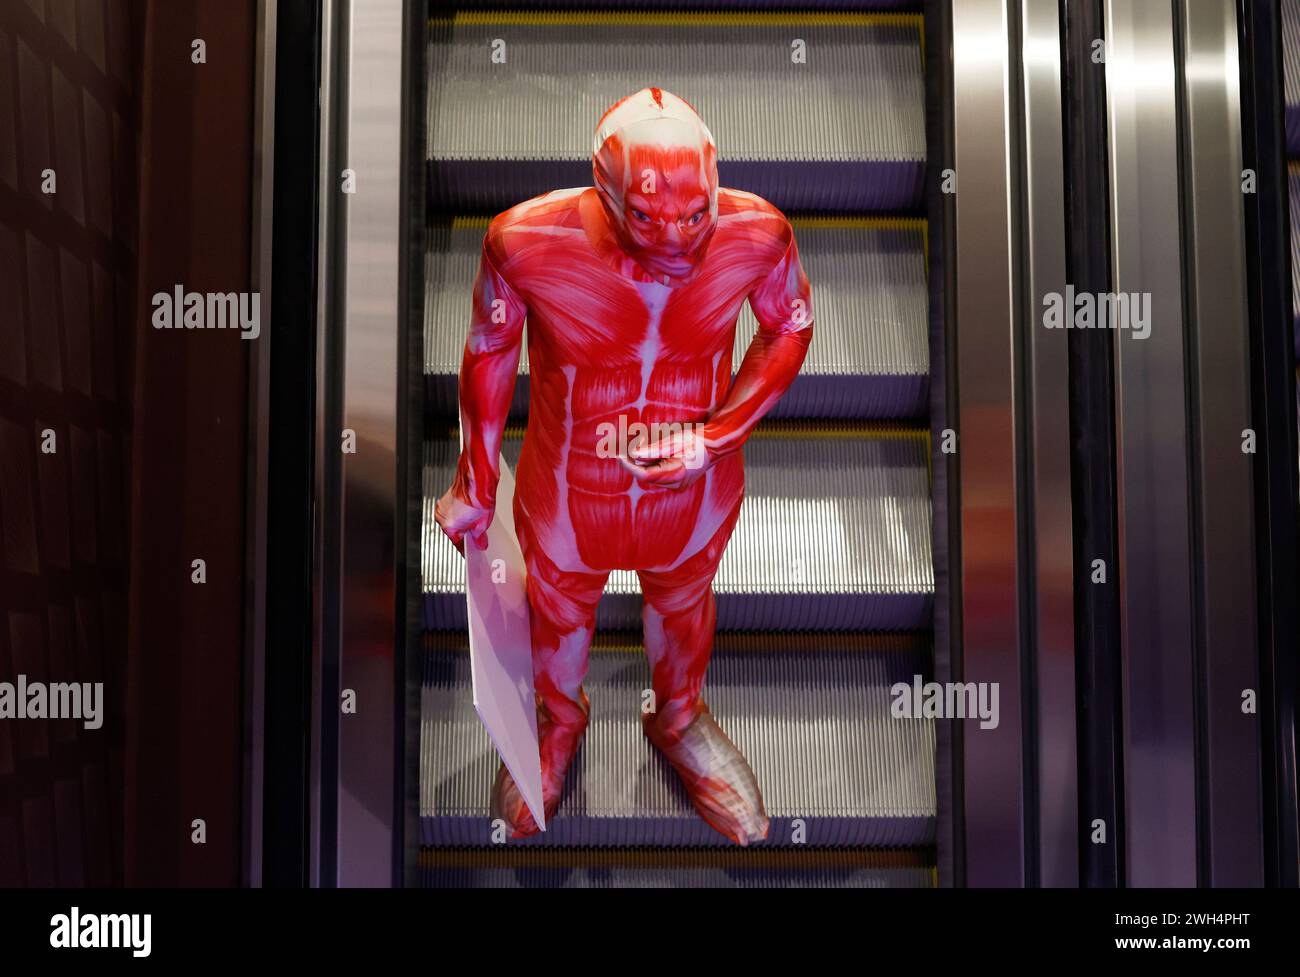 Las Vegas, United States. 07th Feb, 2024. A worker dressed in costume to advertise for 'Bodies The Exhibition' rides an elevator at the Luxor Hotel & Casino leading up to Super Bowl LVIII at the Mandalay Bay Convention Center in Las Vegas, Nevada on Wednesday, February 7, 2024. The San Francisco 49ers will play the Kansas City Chiefs in Super Bowl LVIII at Allegiant Stadium in Las Vegas, Nevada on Sunday, February 11, 2024. Photo by John Angelillo/UPI Credit: UPI/Alamy Live News Stock Photo